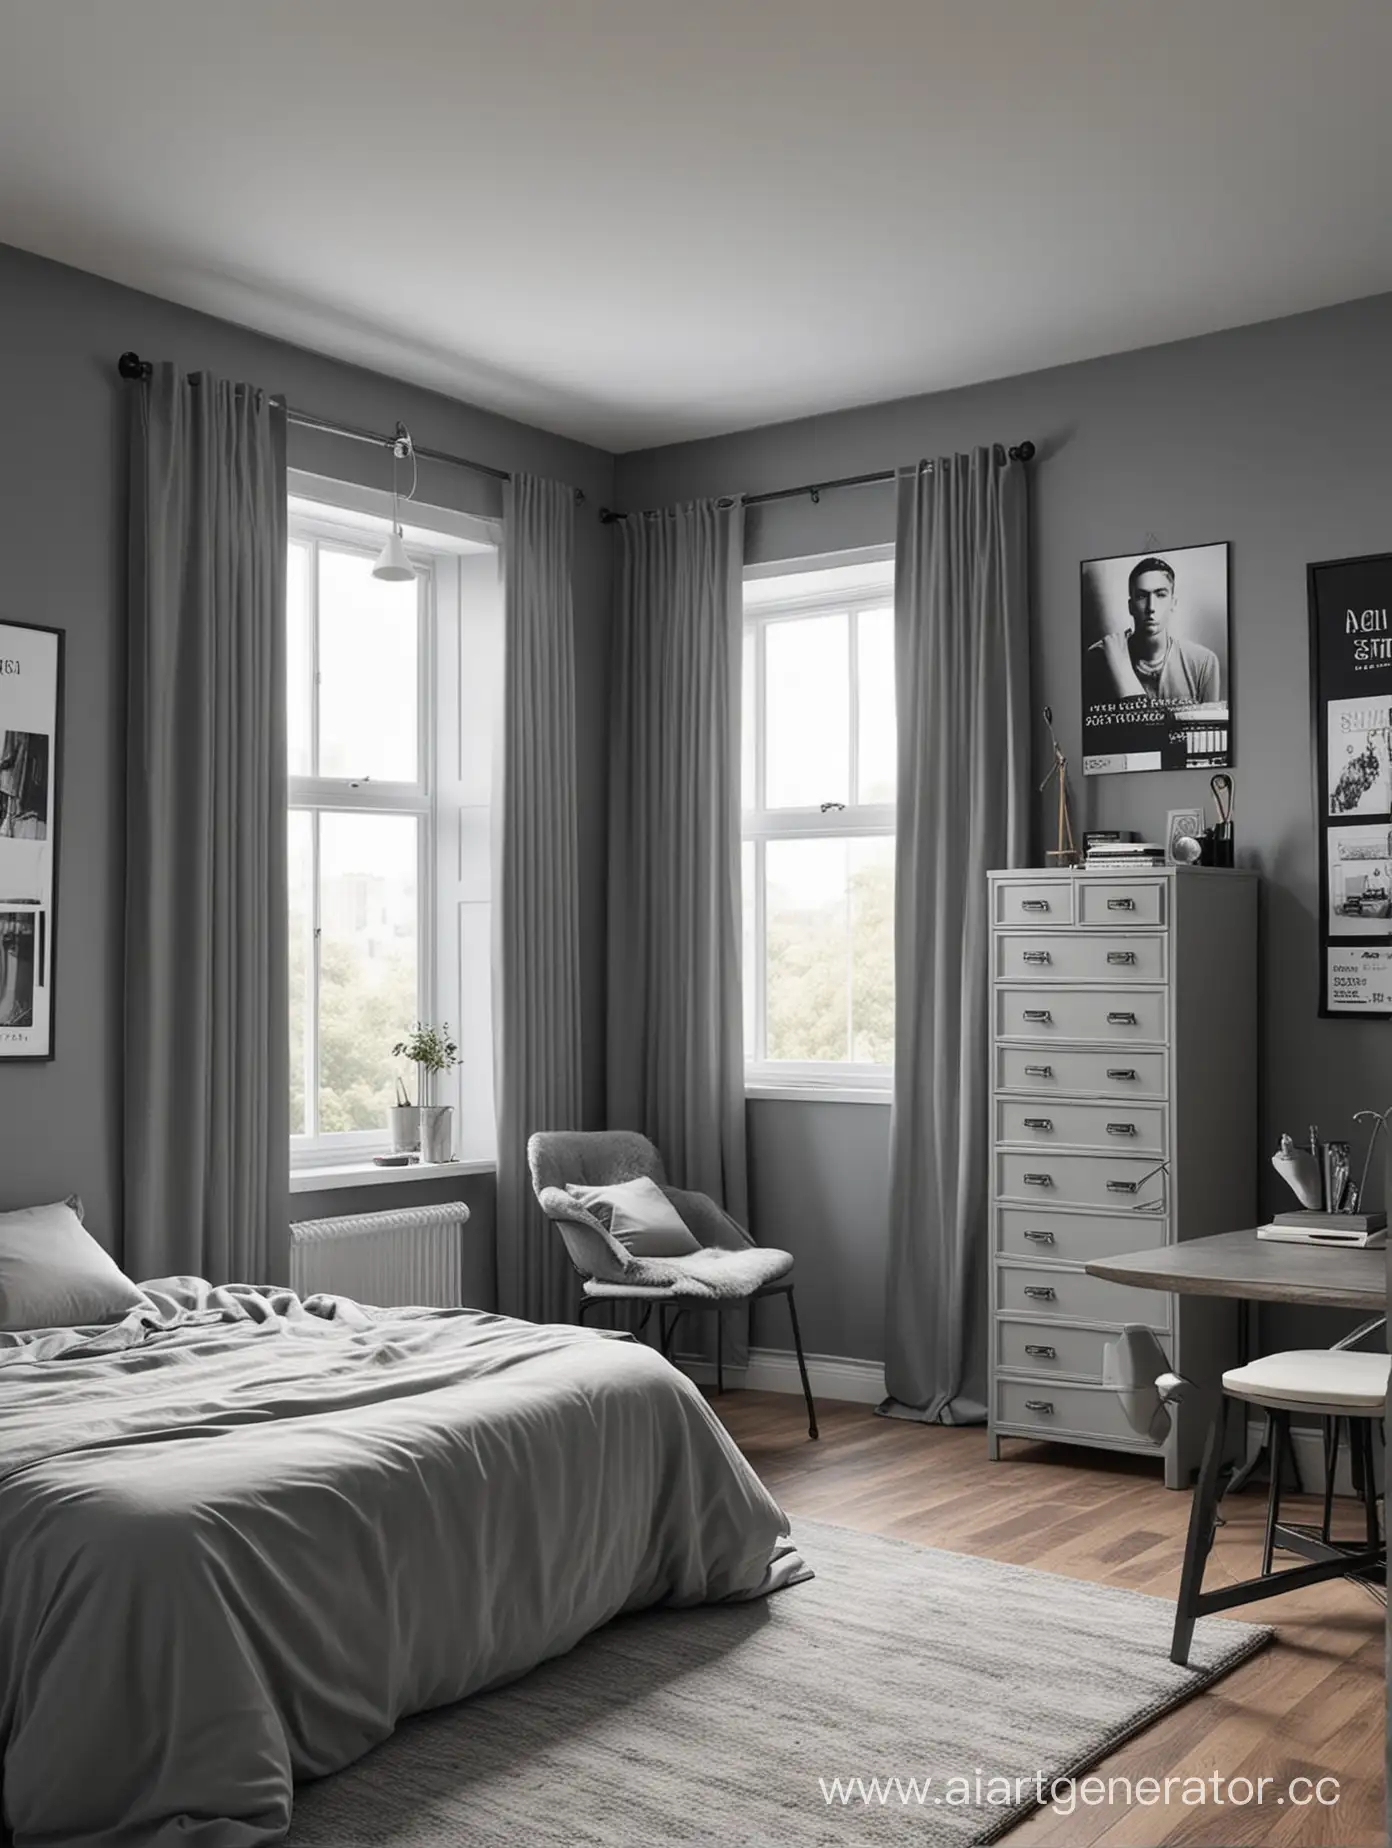 Spacious-Gray-Room-with-Bed-Desk-Wardrobe-and-Eminem-Posters